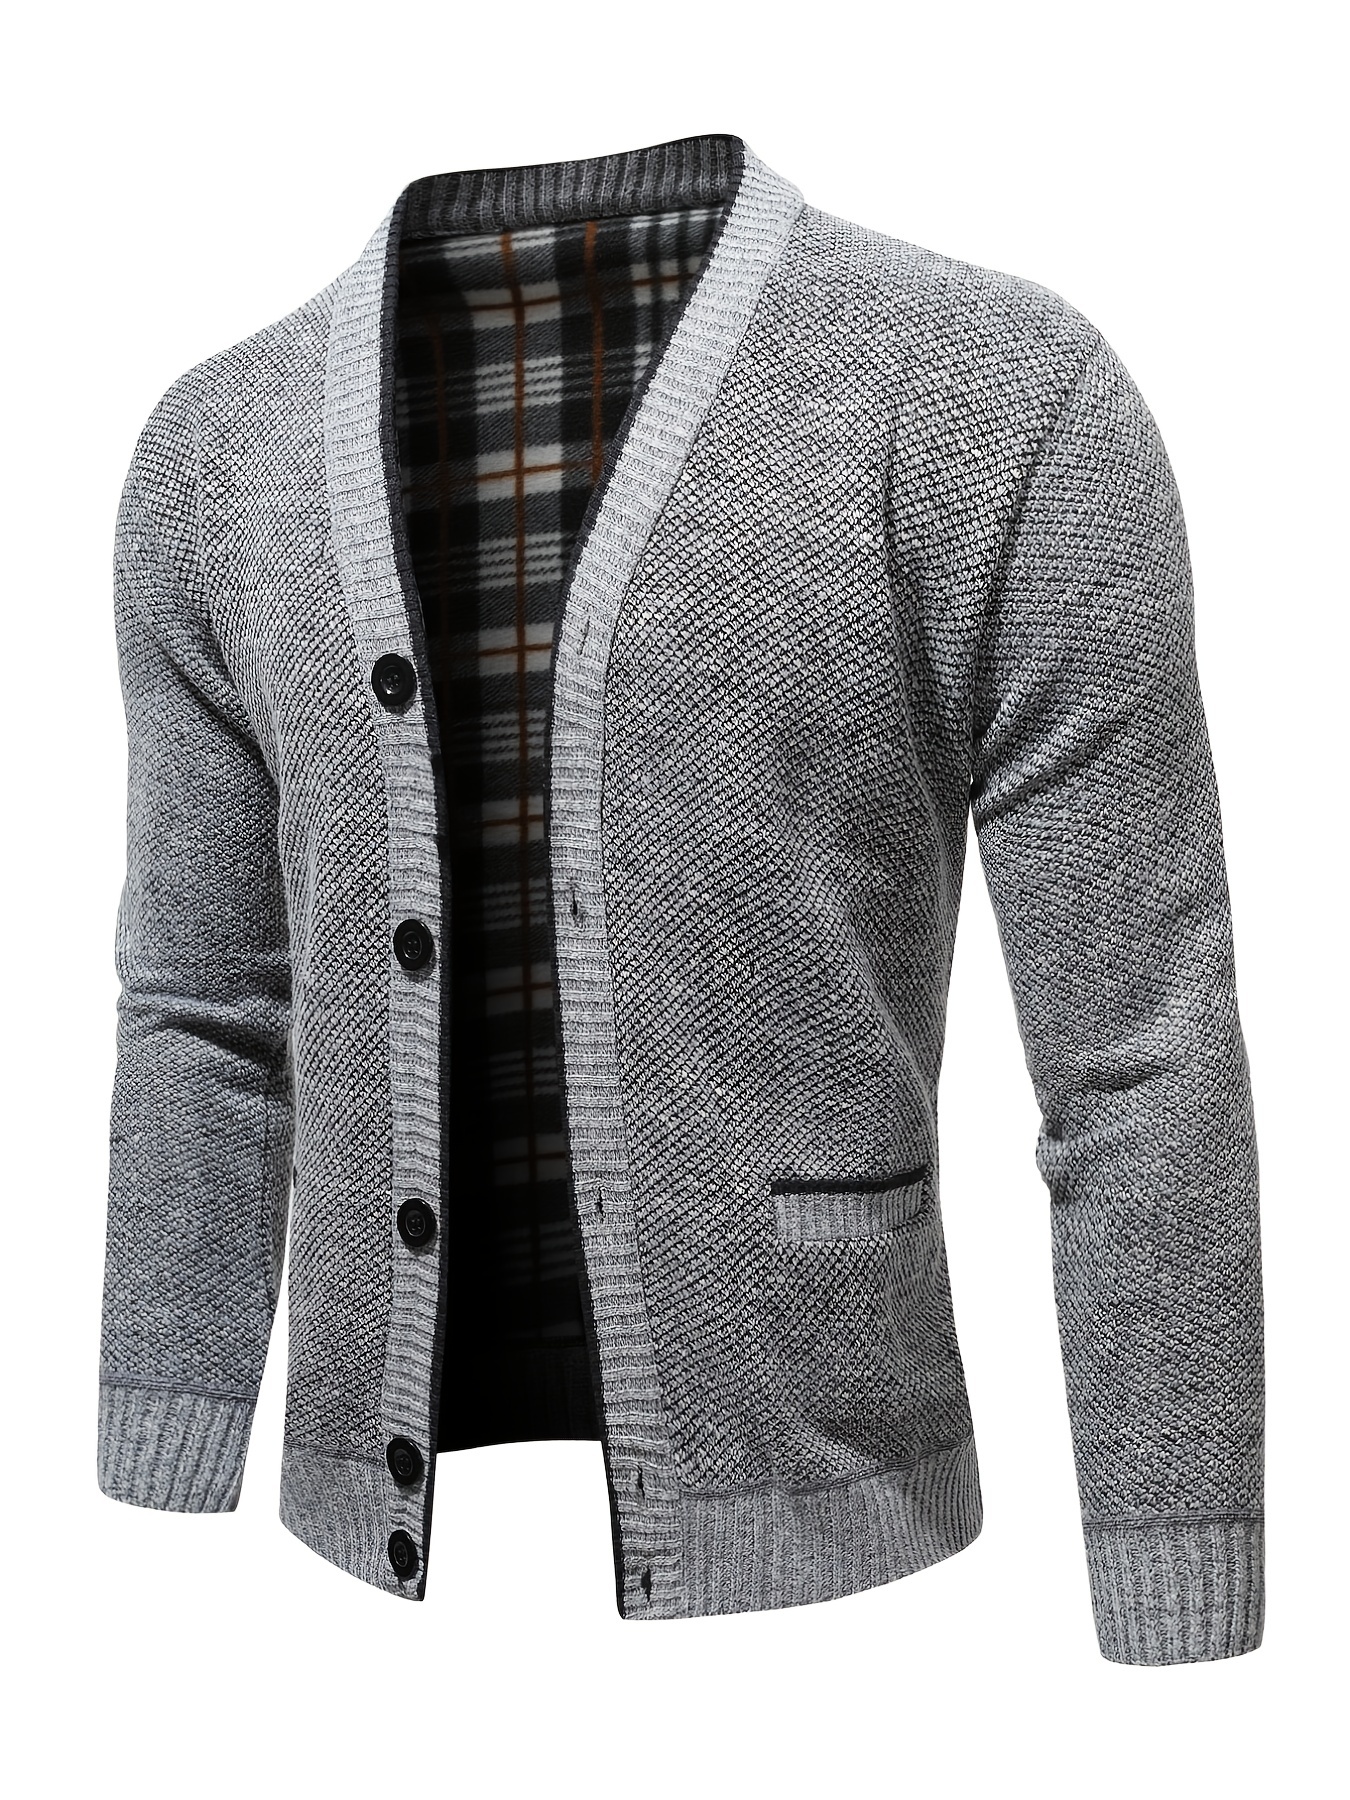 Sweater with structure - light gray